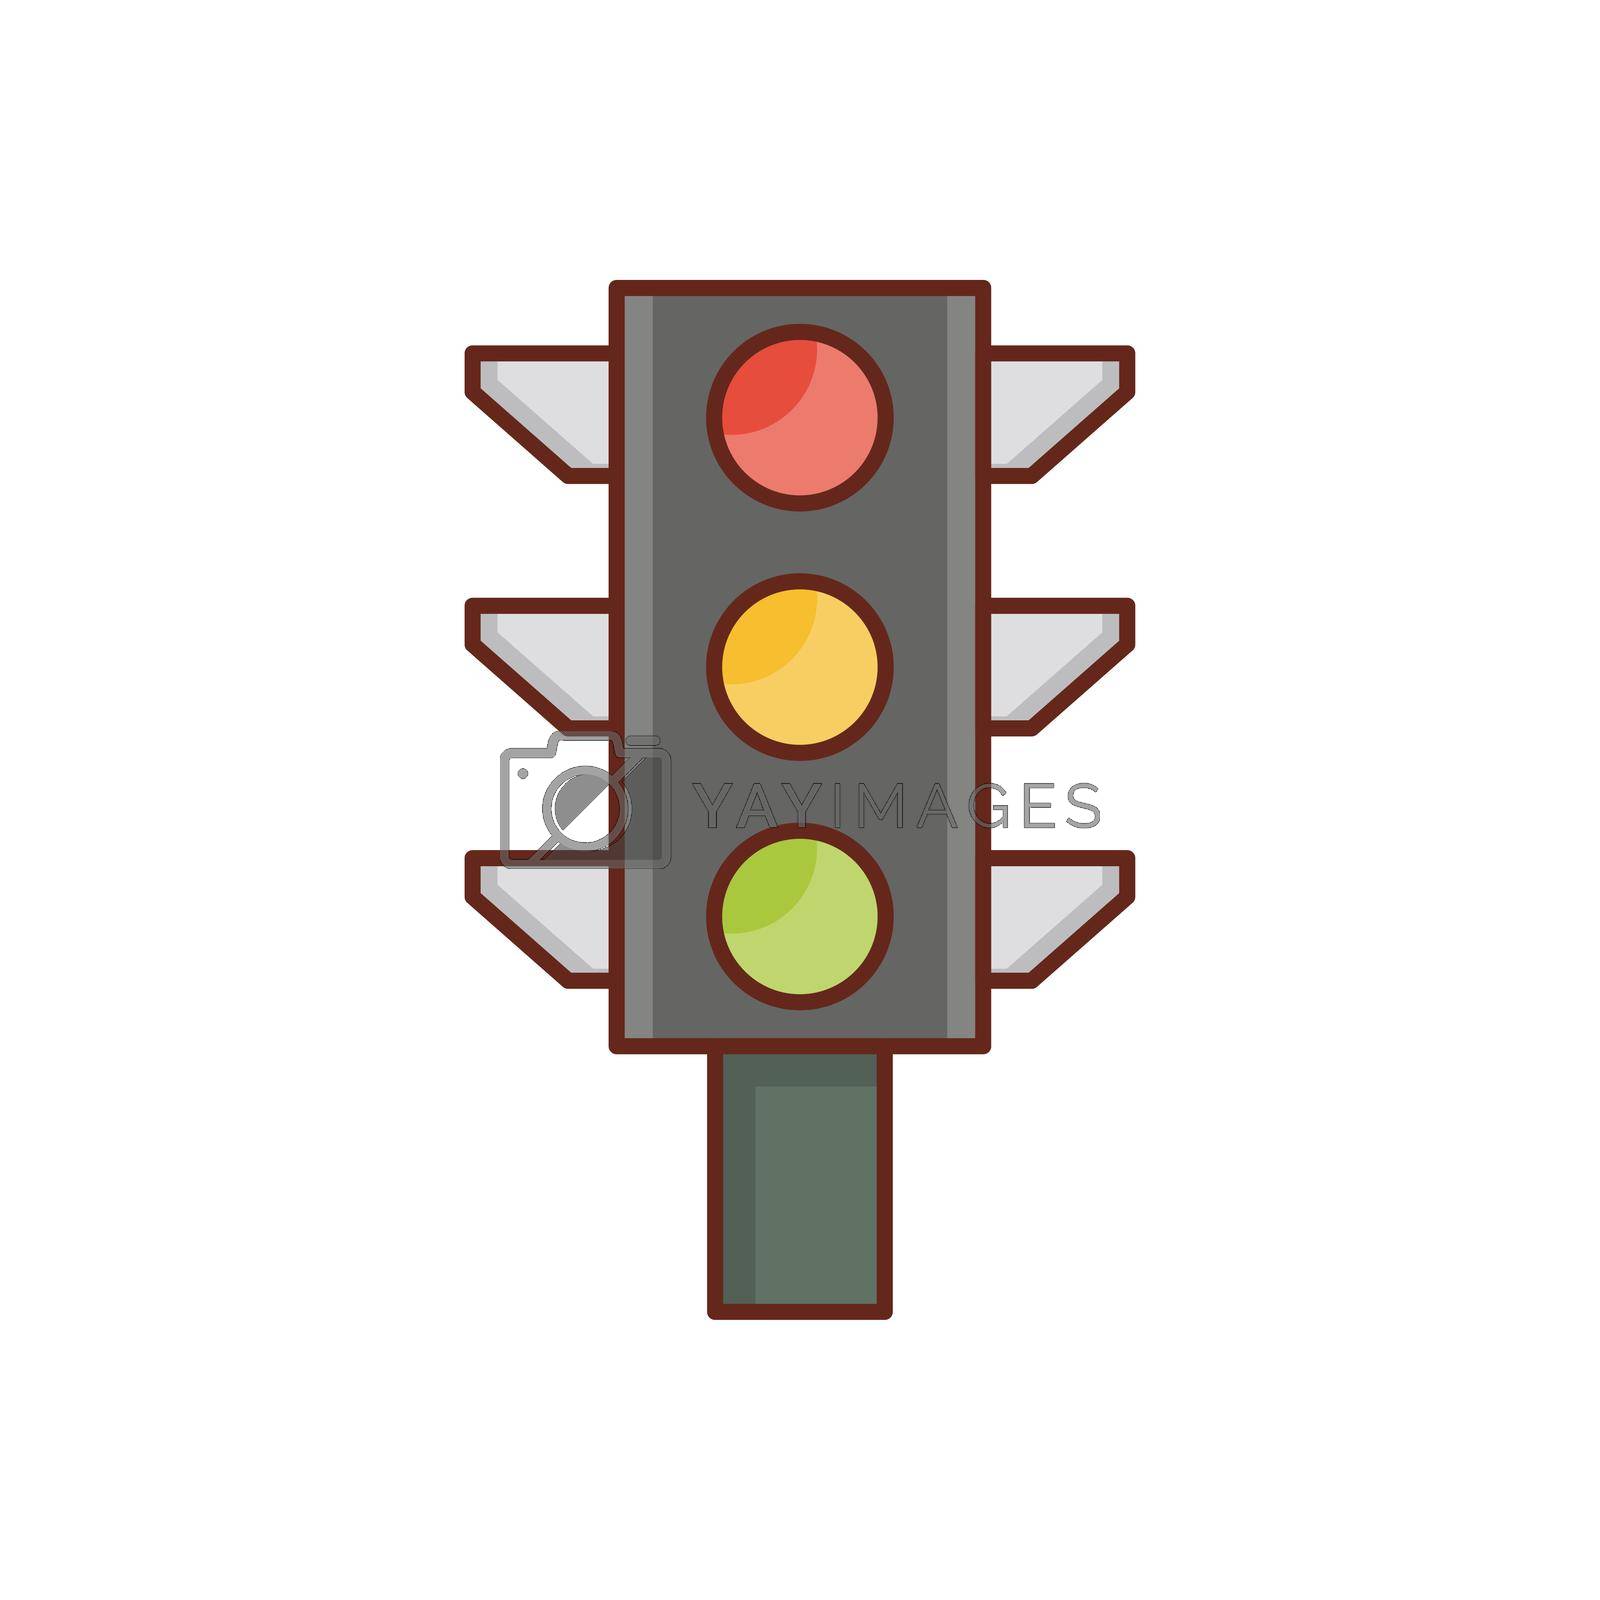 Royalty free image of traffic  by FlaticonsDesign